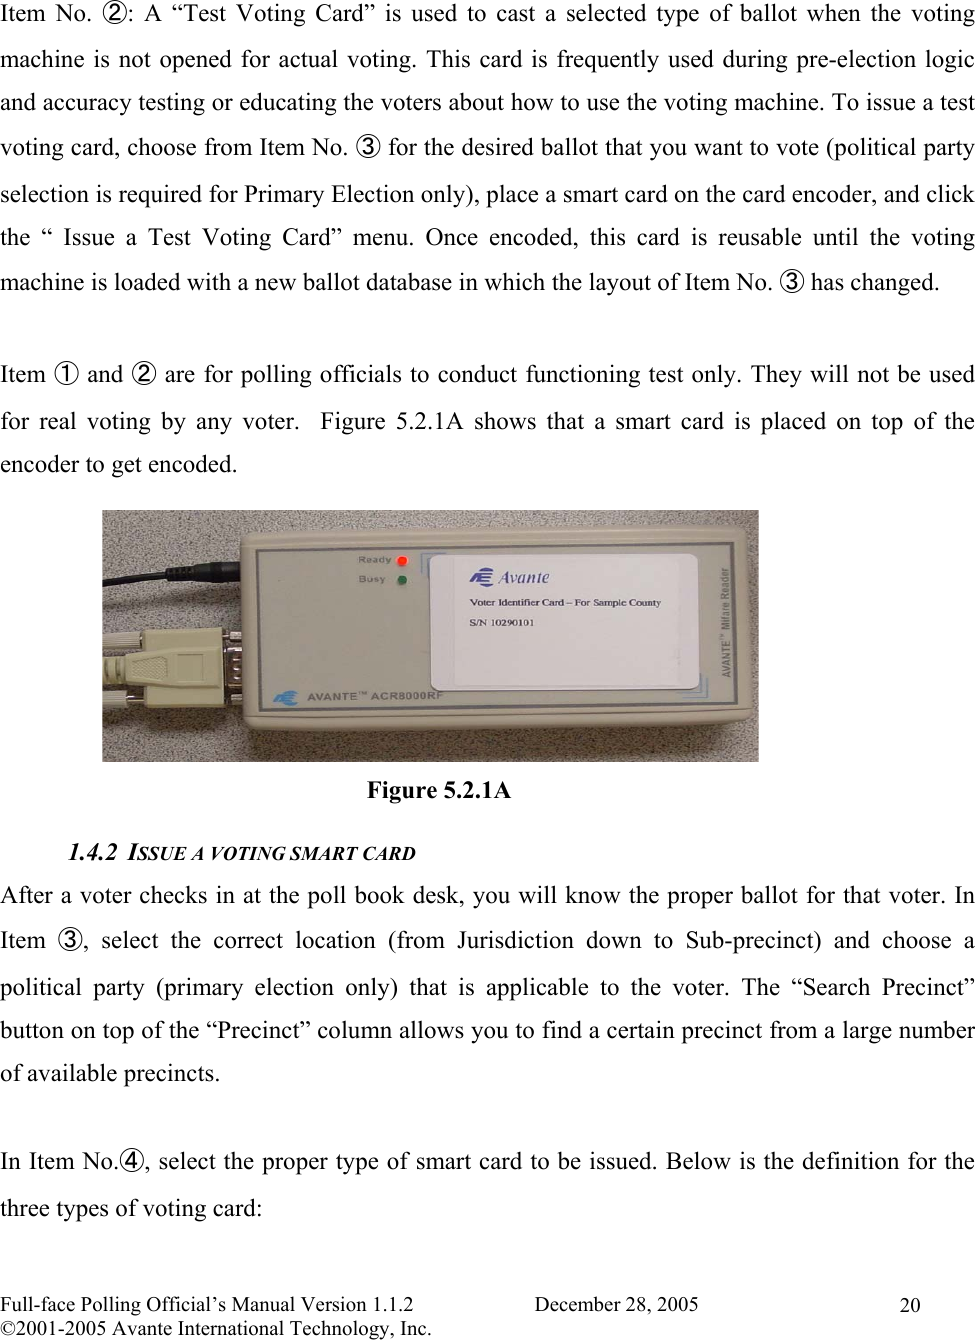    Full-face Polling Official’s Manual Version 1.1.2                       December 28, 2005 ©2001-2005 Avante International Technology, Inc.   20 Item No. ②: A “Test Voting Card” is used to cast a selected type of ballot when the voting machine is not opened for actual voting. This card is frequently used during pre-election logic and accuracy testing or educating the voters about how to use the voting machine. To issue a test voting card, choose from Item No. ③ for the desired ballot that you want to vote (political party selection is required for Primary Election only), place a smart card on the card encoder, and click the “ Issue a Test Voting Card” menu. Once encoded, this card is reusable until the voting machine is loaded with a new ballot database in which the layout of Item No. ③ has changed.  Item ① and ② are for polling officials to conduct functioning test only. They will not be used for real voting by any voter.  Figure 5.2.1A shows that a smart card is placed on top of the encoder to get encoded.         1.4.2 ISSUE A VOTING SMART CARD After a voter checks in at the poll book desk, you will know the proper ballot for that voter. In Item  ③, select the correct location (from Jurisdiction down to Sub-precinct) and choose a political party (primary election only) that is applicable to the voter. The “Search Precinct” button on top of the “Precinct” column allows you to find a certain precinct from a large number of available precincts.  In Item No.④, select the proper type of smart card to be issued. Below is the definition for the three types of voting card: Figure 5.2.1A 